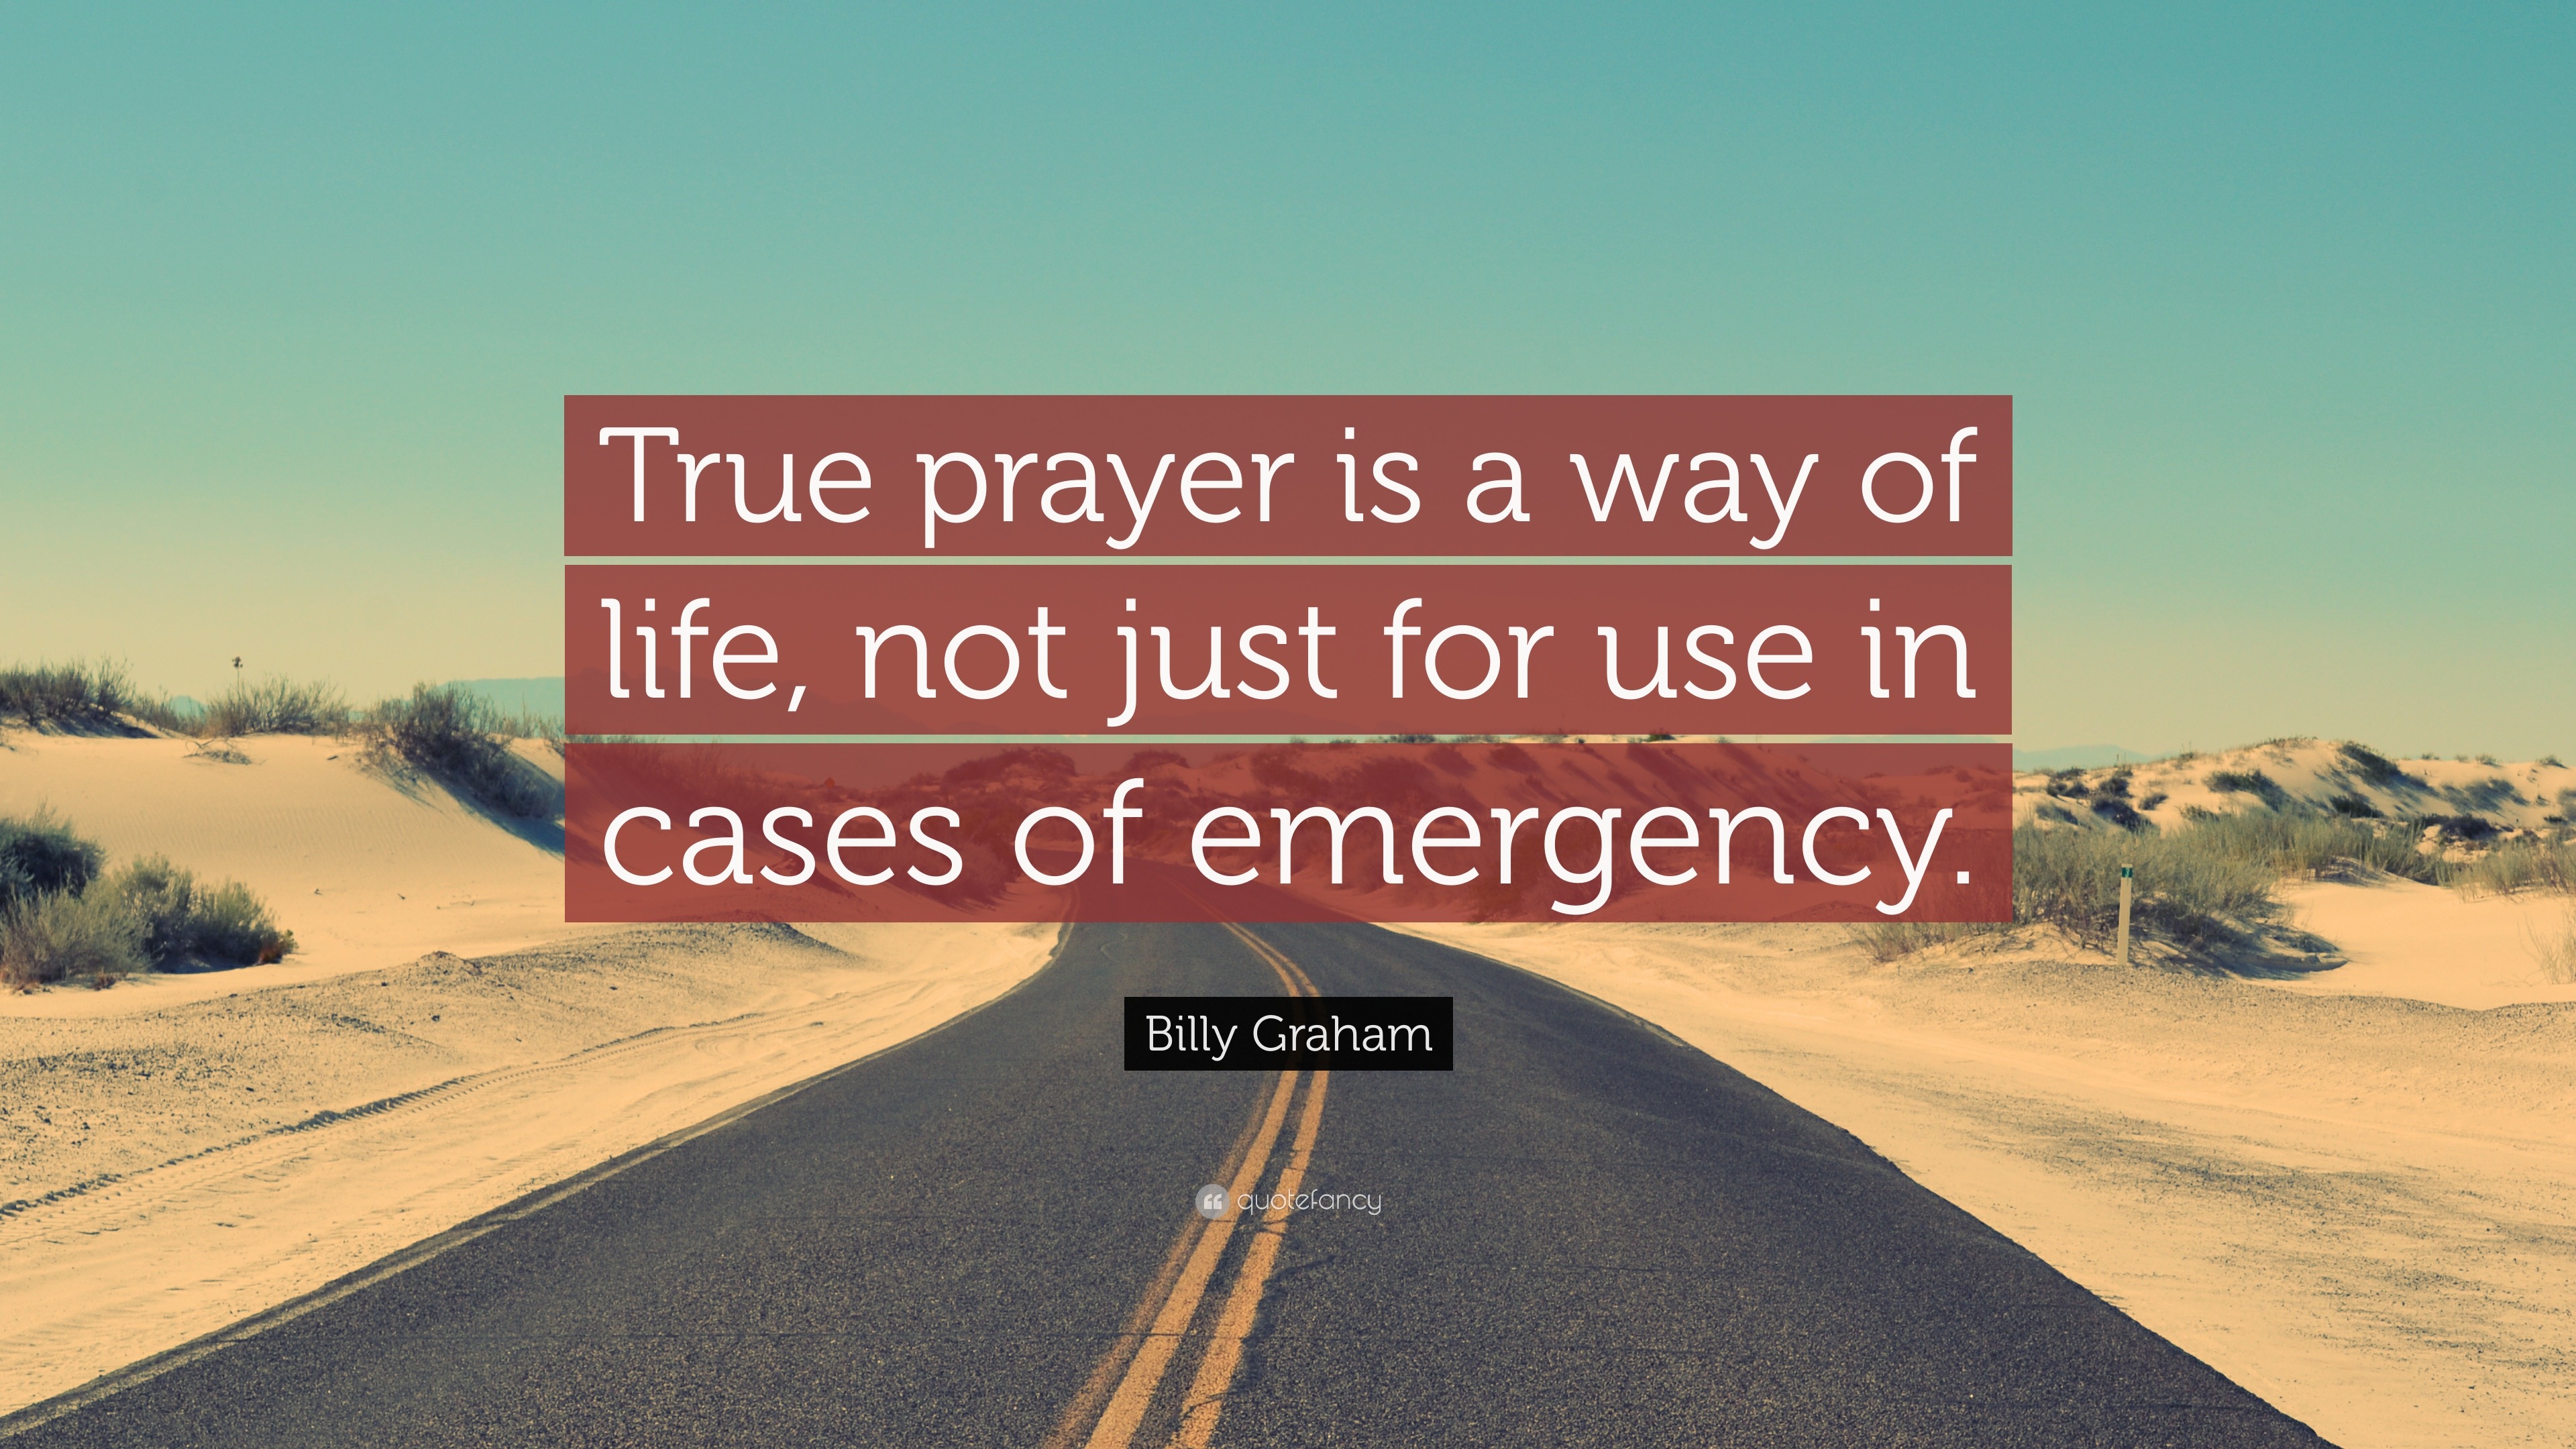 Billy Graham Quote “True prayer is a way of life, not